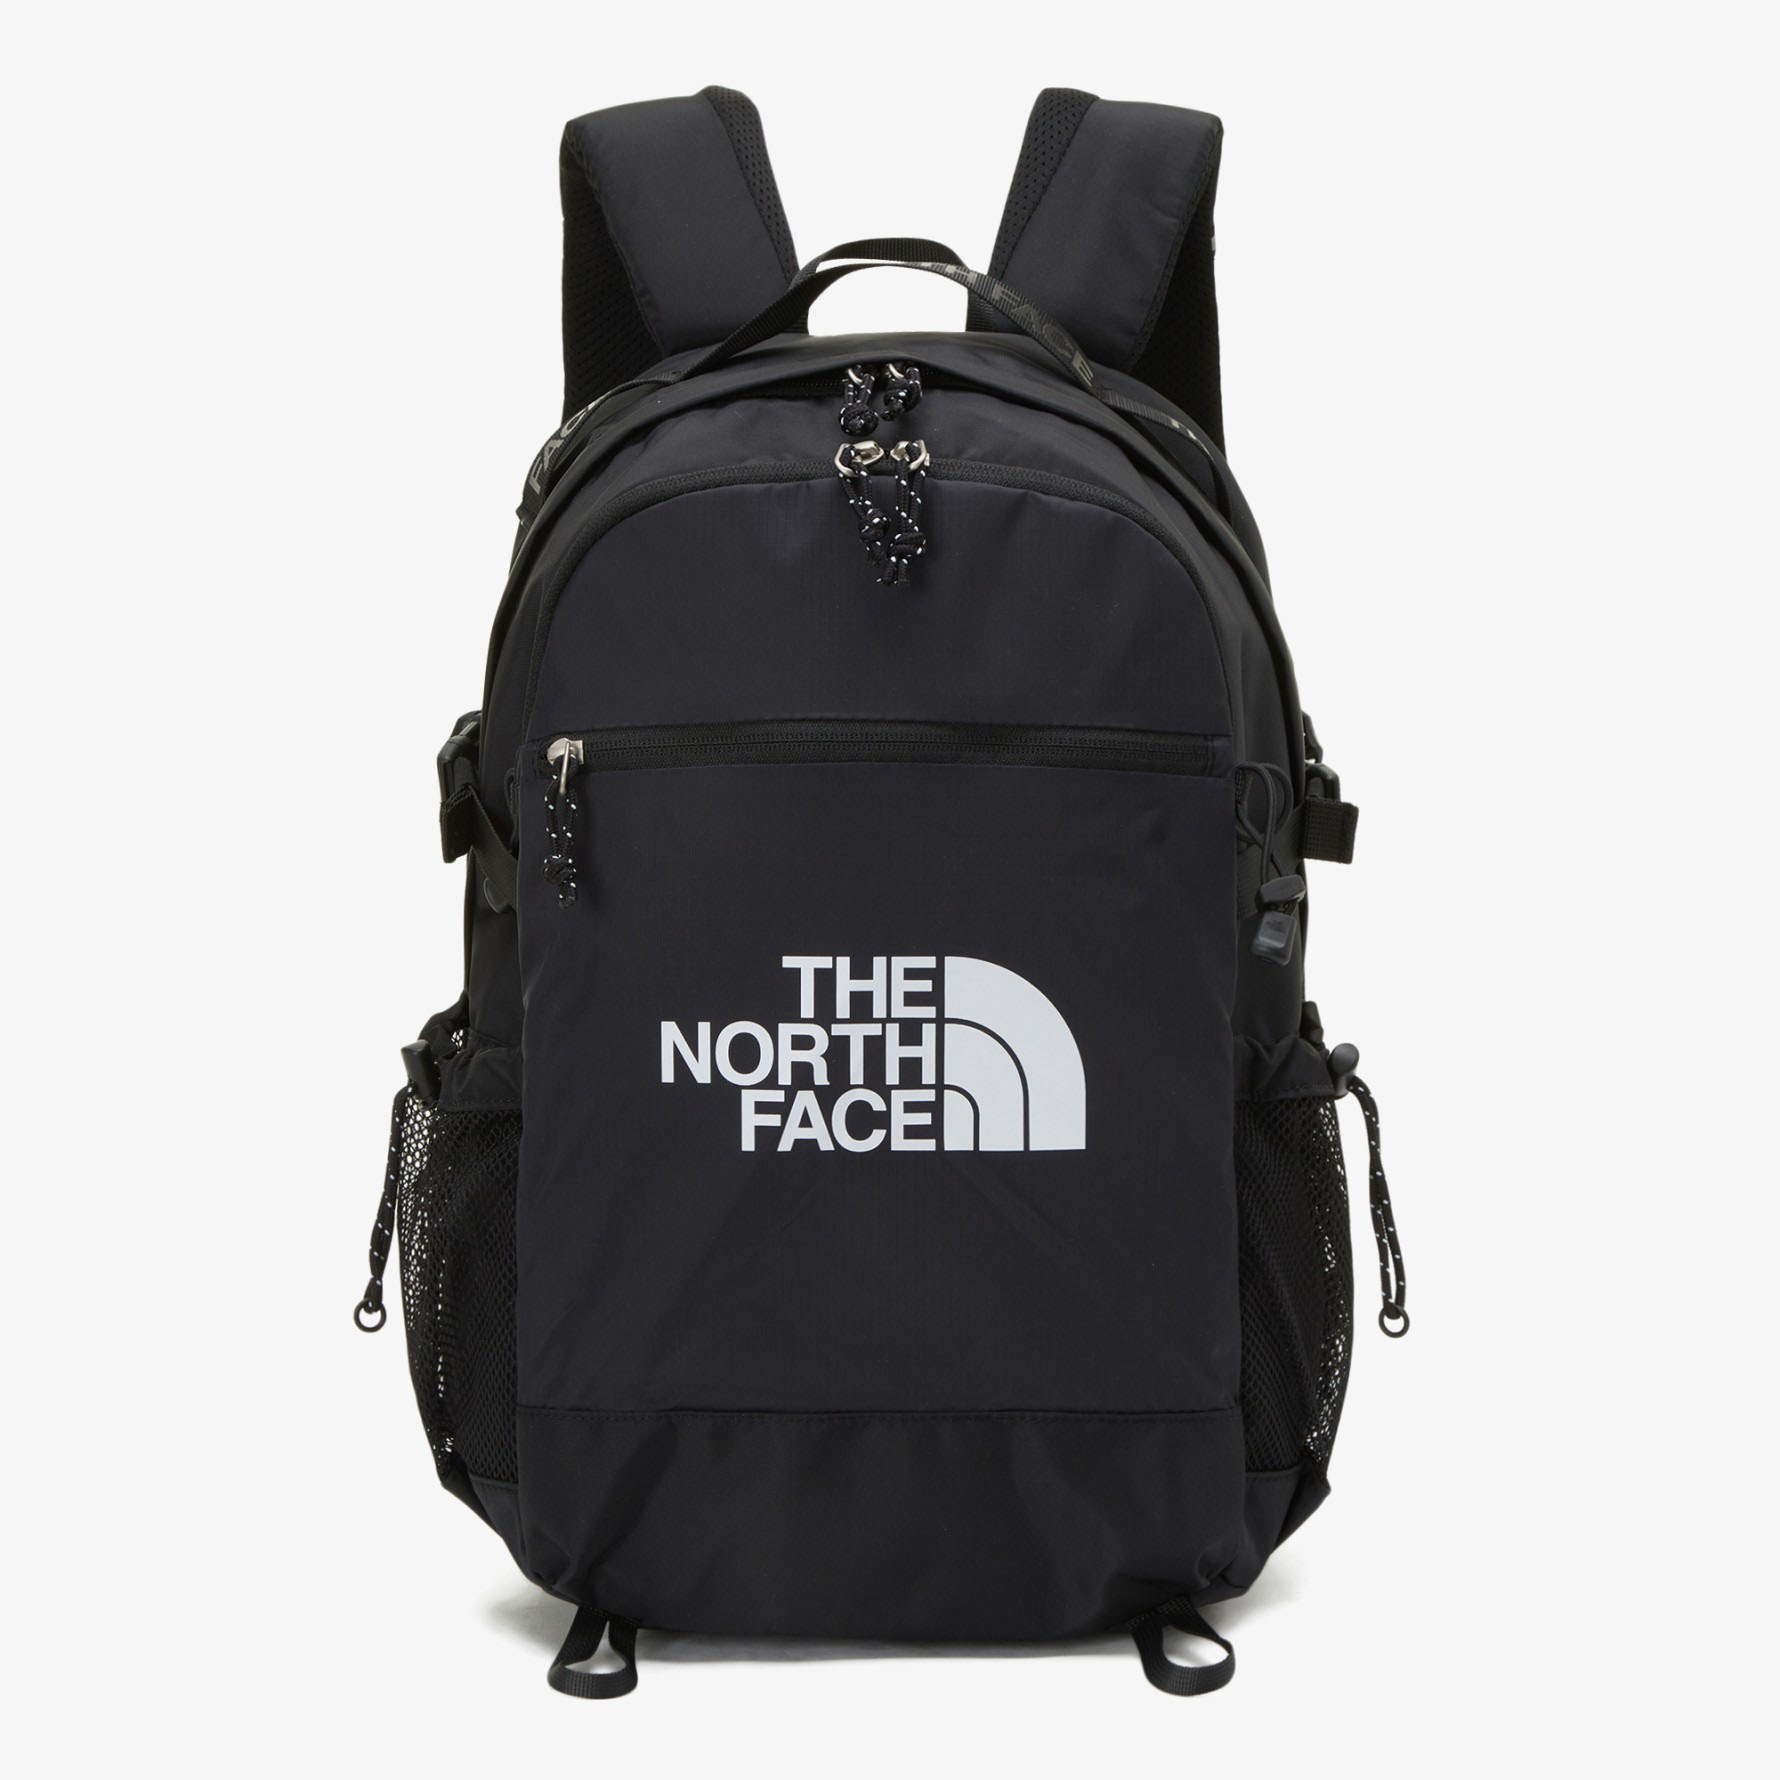 THE NORTH FACE バックパック BREEZE LT 24 24リットル BLACK BE...